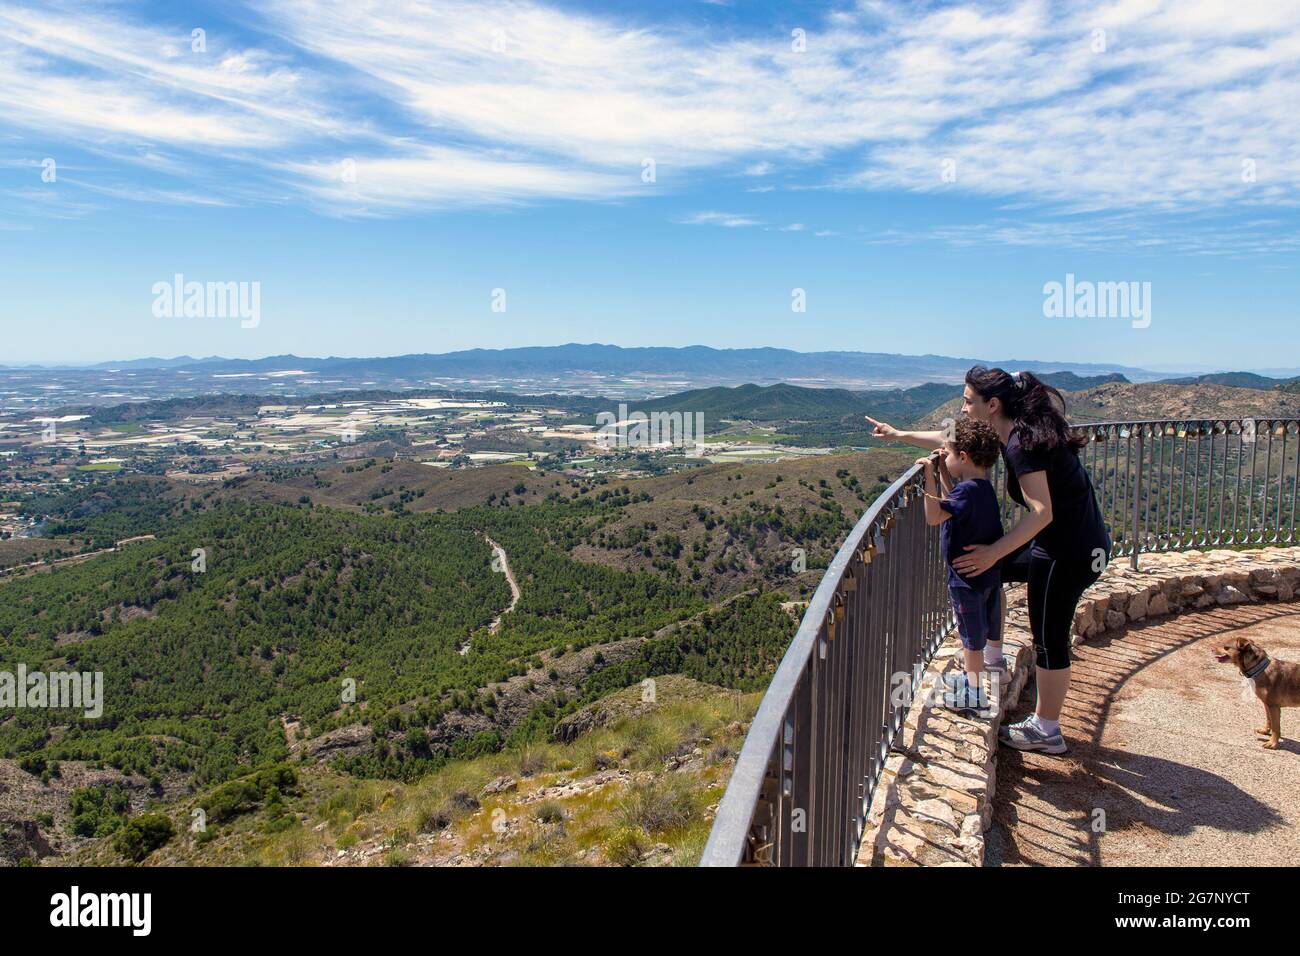 Child about 4-5 years old with his mother observing from a lookout on the heights, while the mother indicates with her index finger where to look. Stock Photo